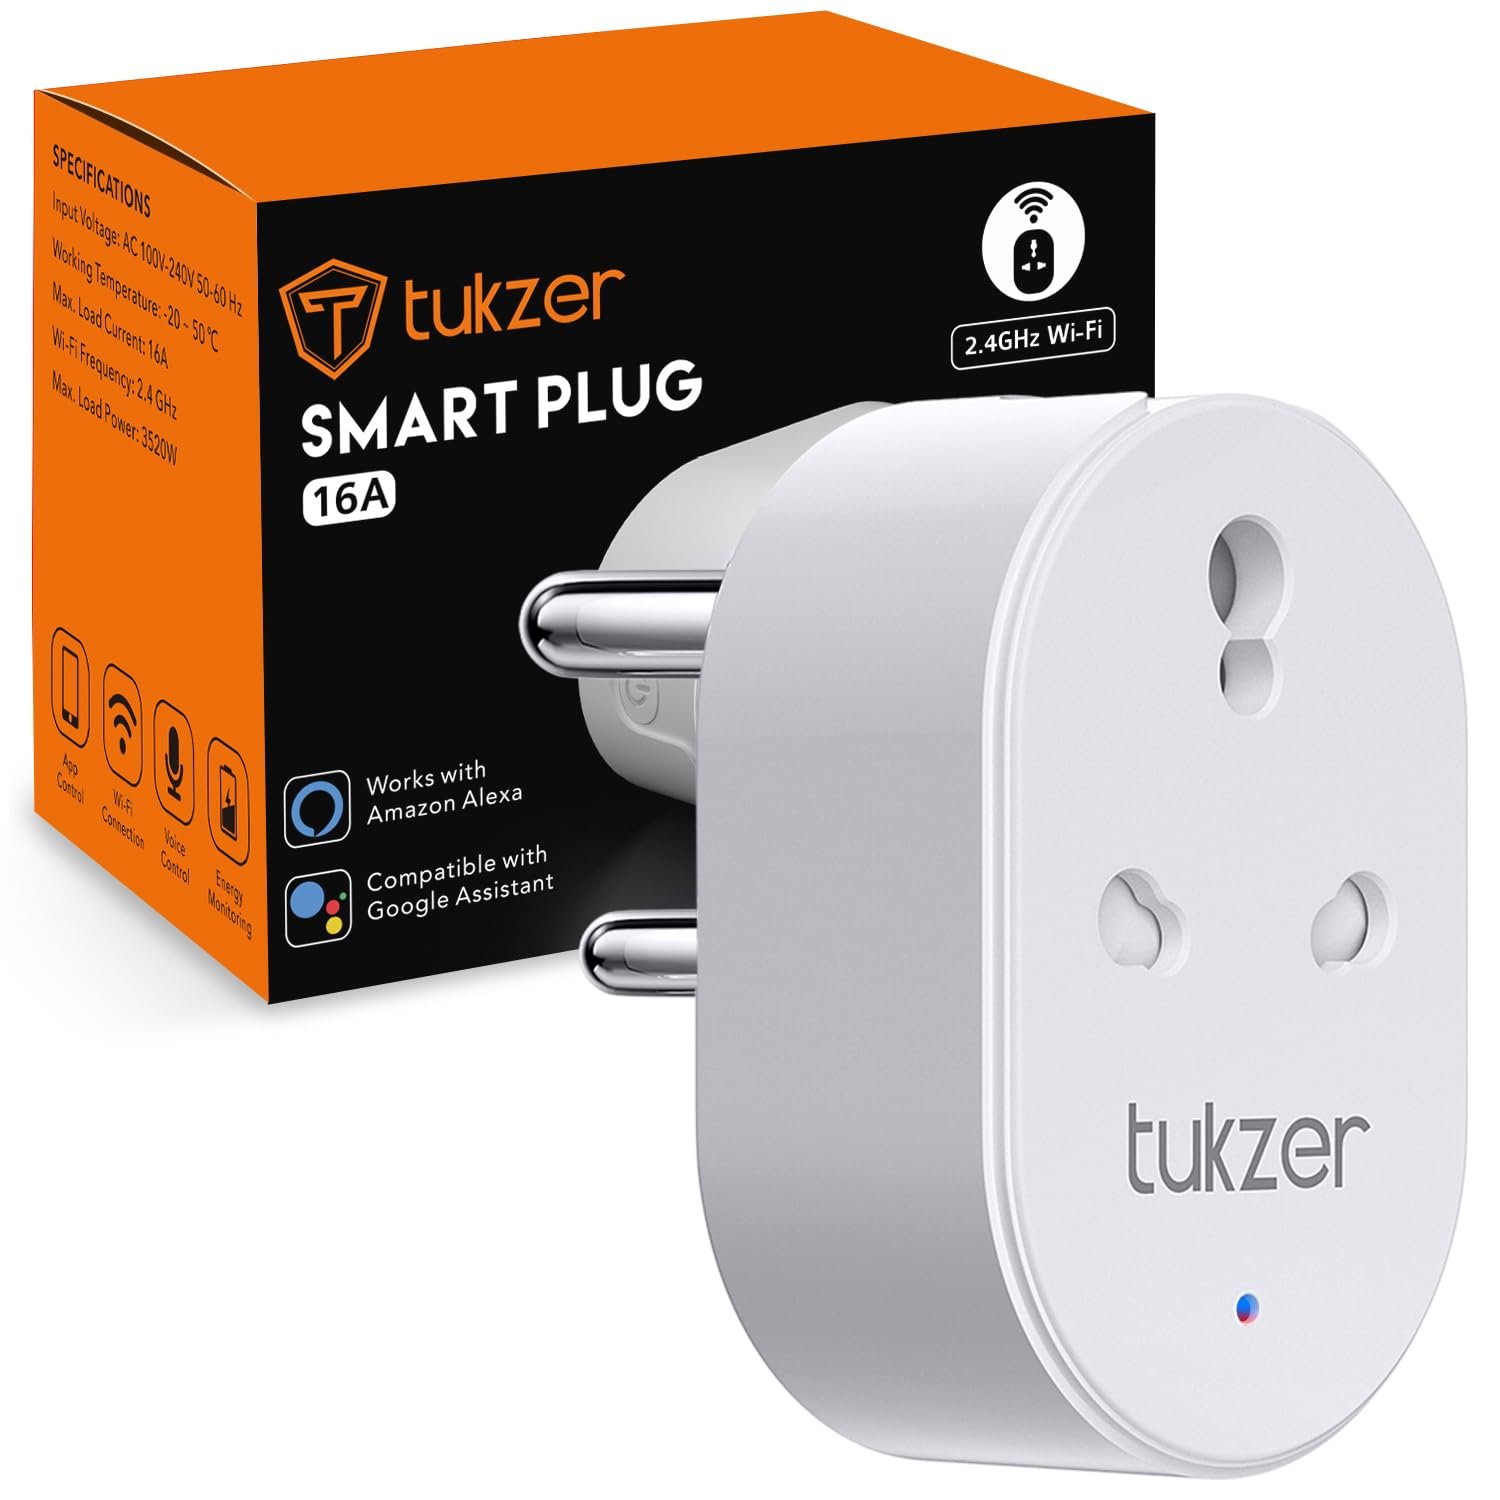 Tukzer 16A WiFi Smart Plug, Work with Alexa & Google Home Assistant, Suitable for Large Appliances like Geysers, Microwave Ovens, and Air Conditioners, Energy Monitoring, Wireless Control